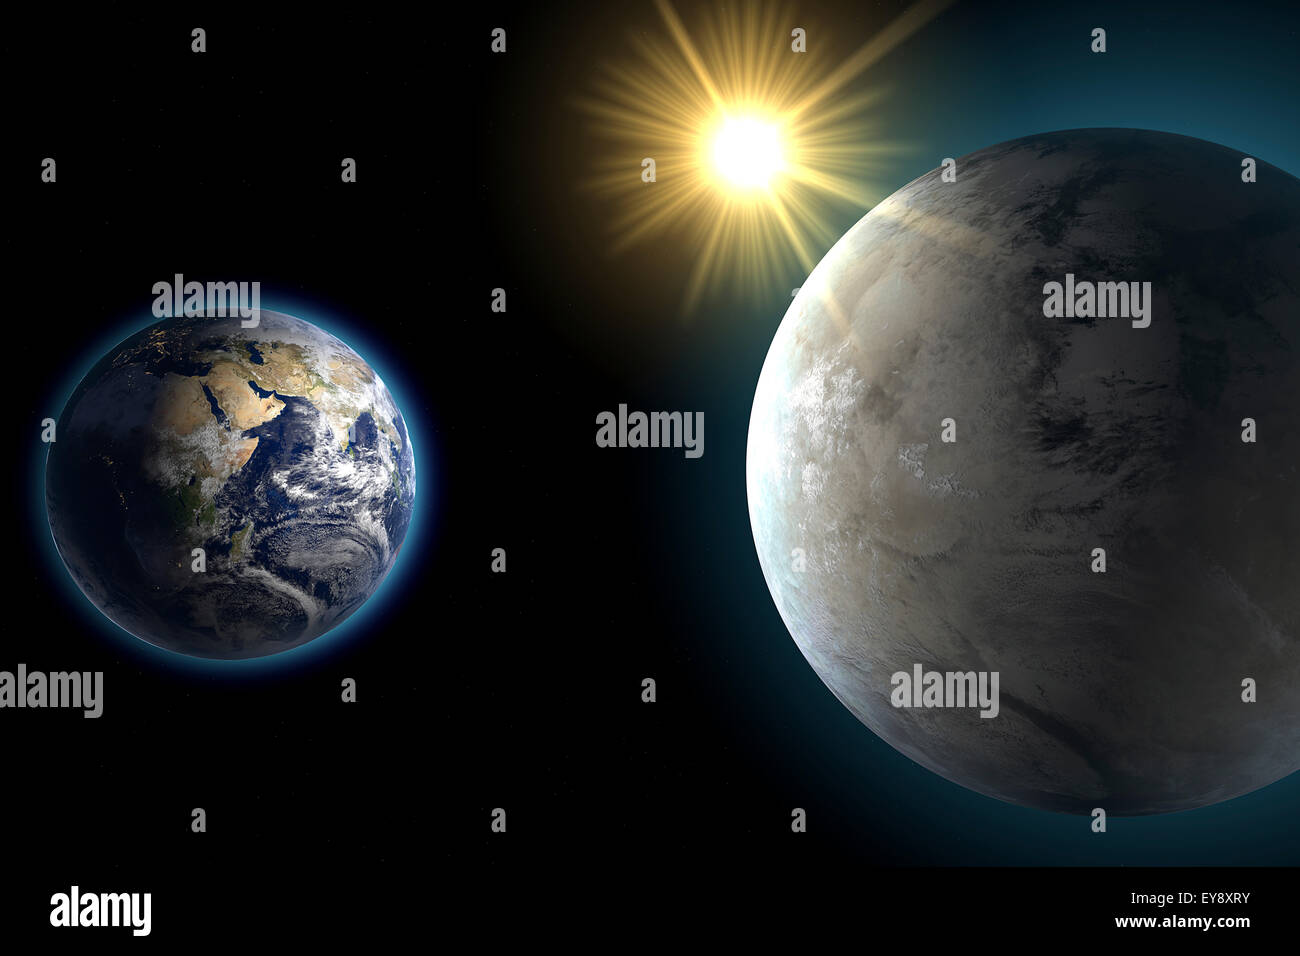 Earth and Kepler 452-b, sister planet, comparison. Element of this image are furnished by NASA Stock Photo